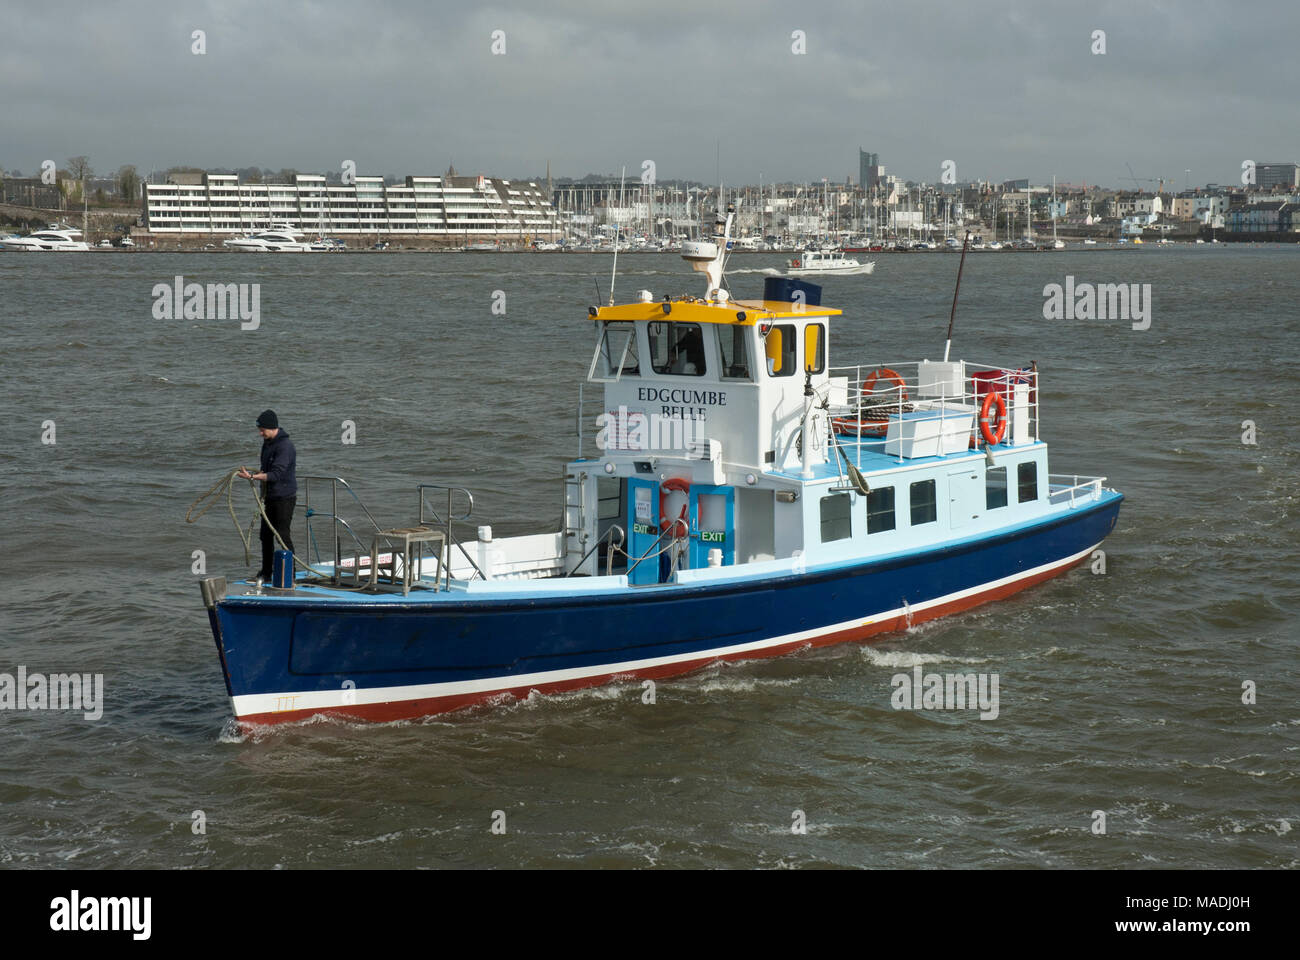 The Cremyll passenger Ferry crossing the Tamar from Plymouth in devon to Cremyll/ Mount Edgcumbe in Cornwall. Stock Photo